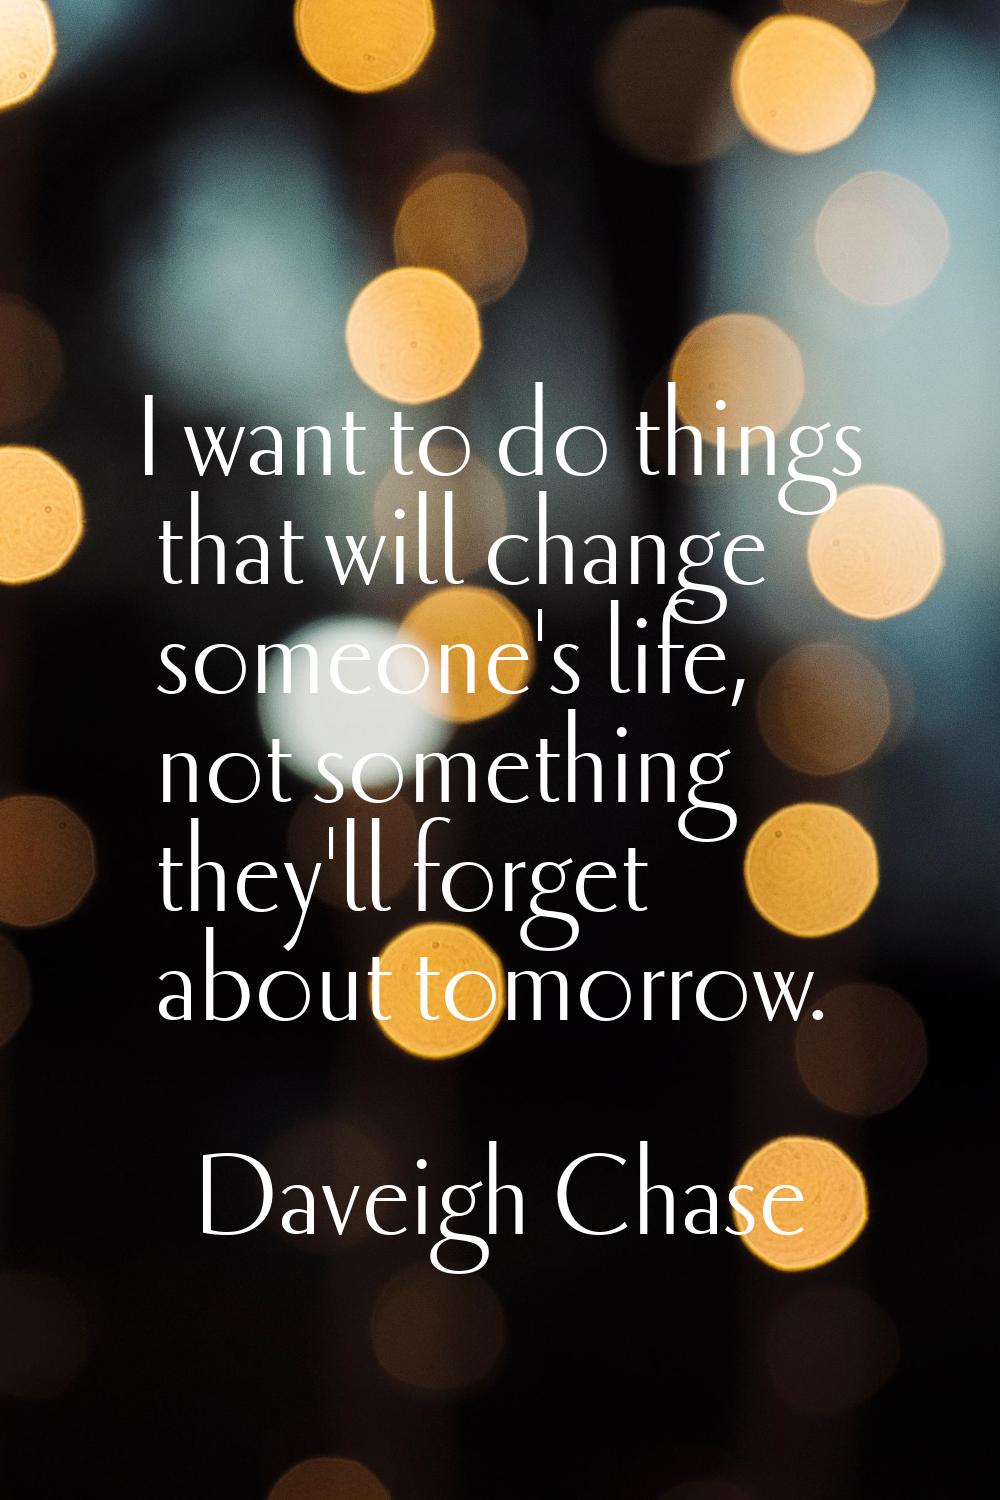 I want to do things that will change someone's life, not something they'll forget about tomorrow.